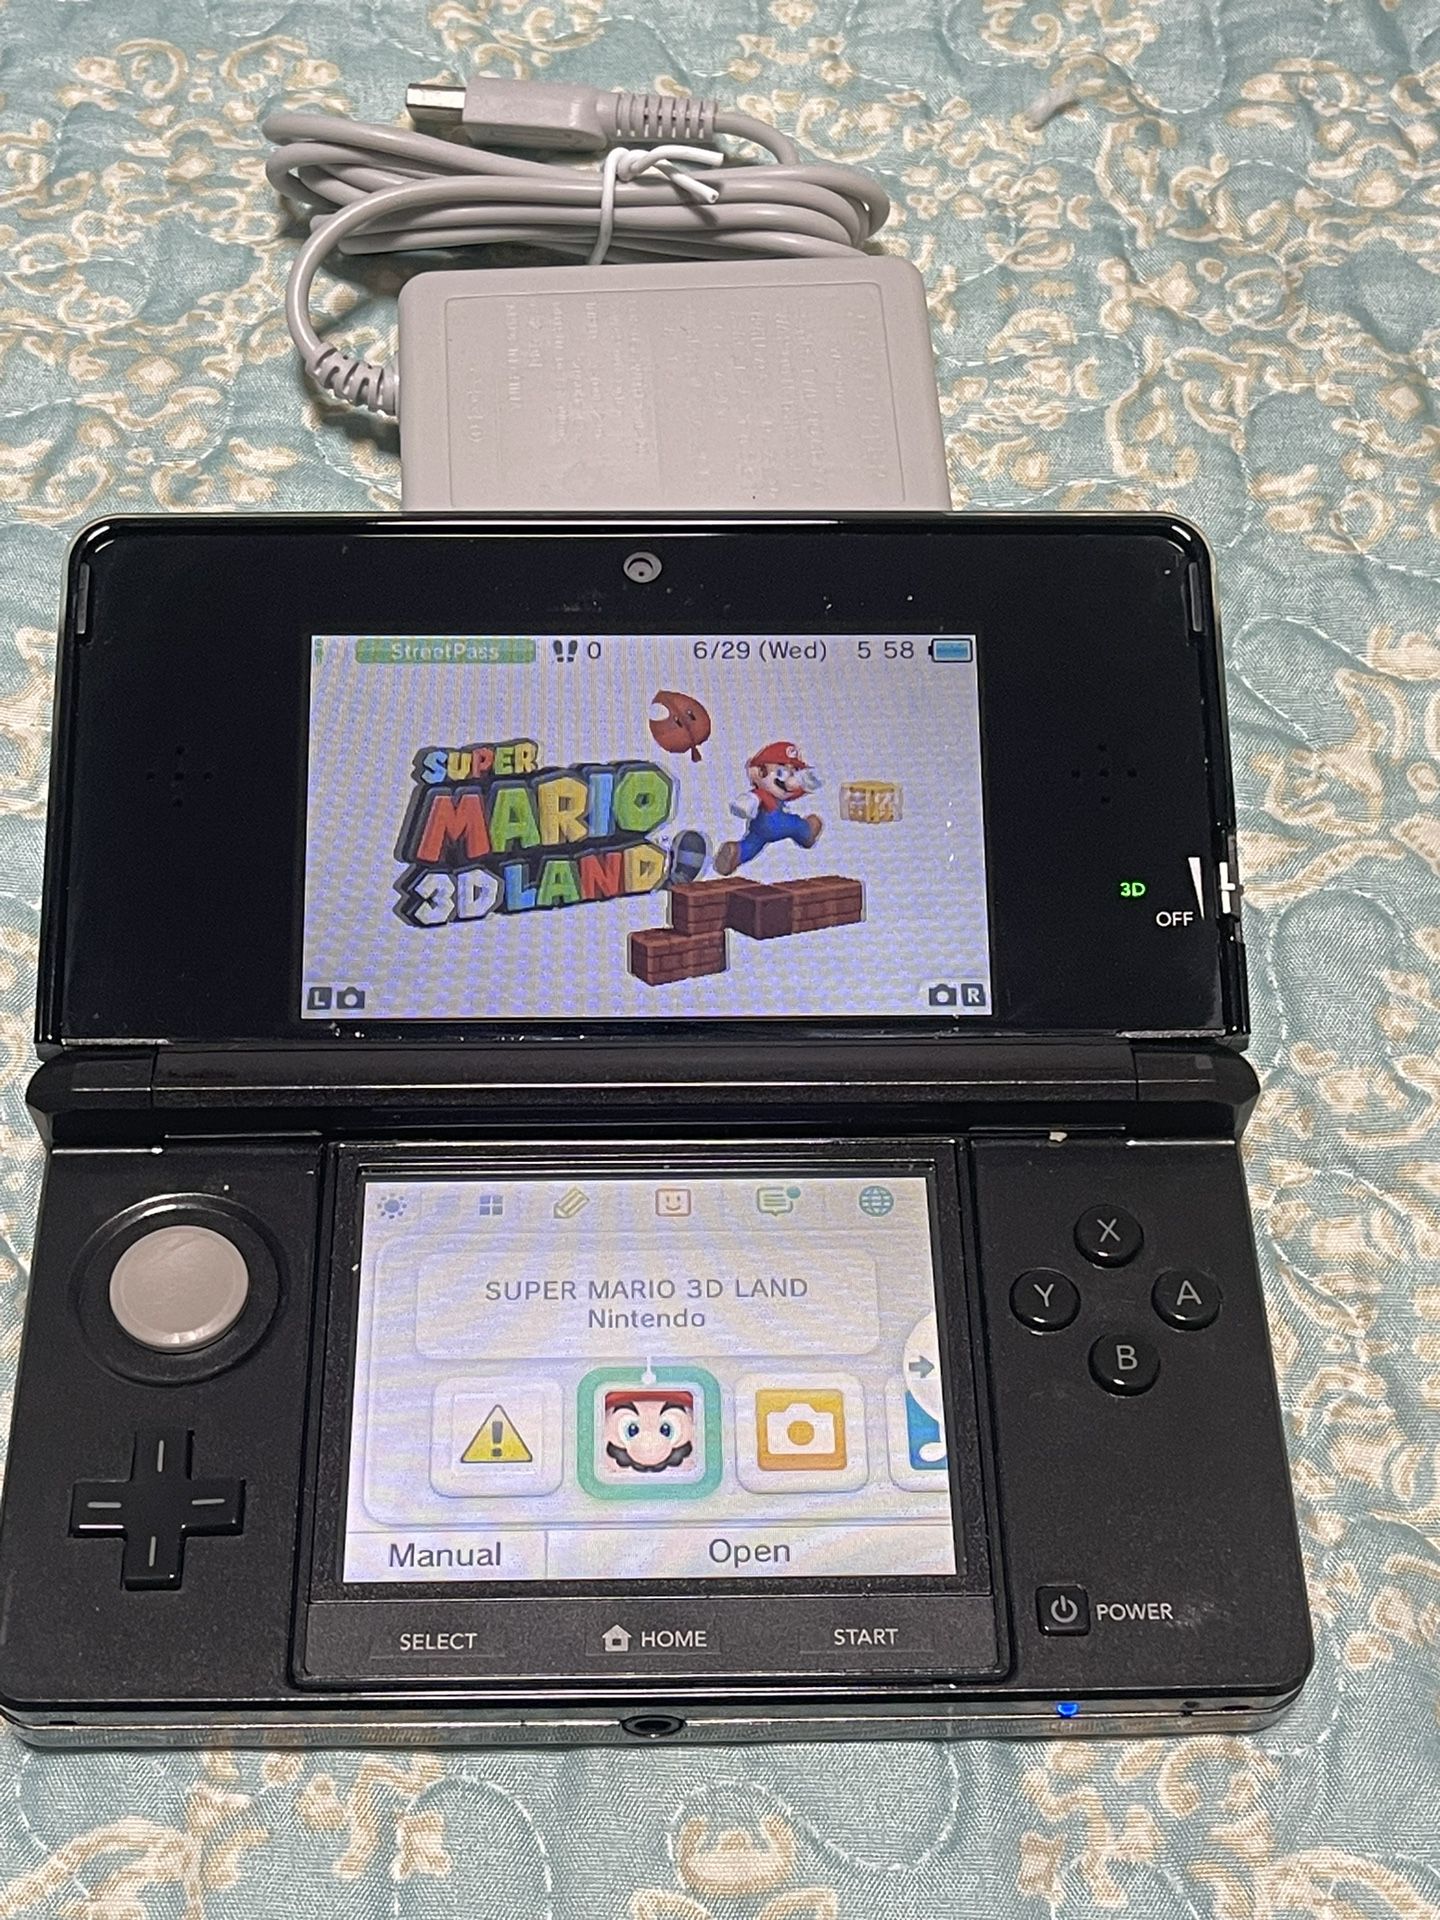 Nintendo 3DS In Good Condition Fully Functional it comes with super Mario 3D land, charger and SD Card